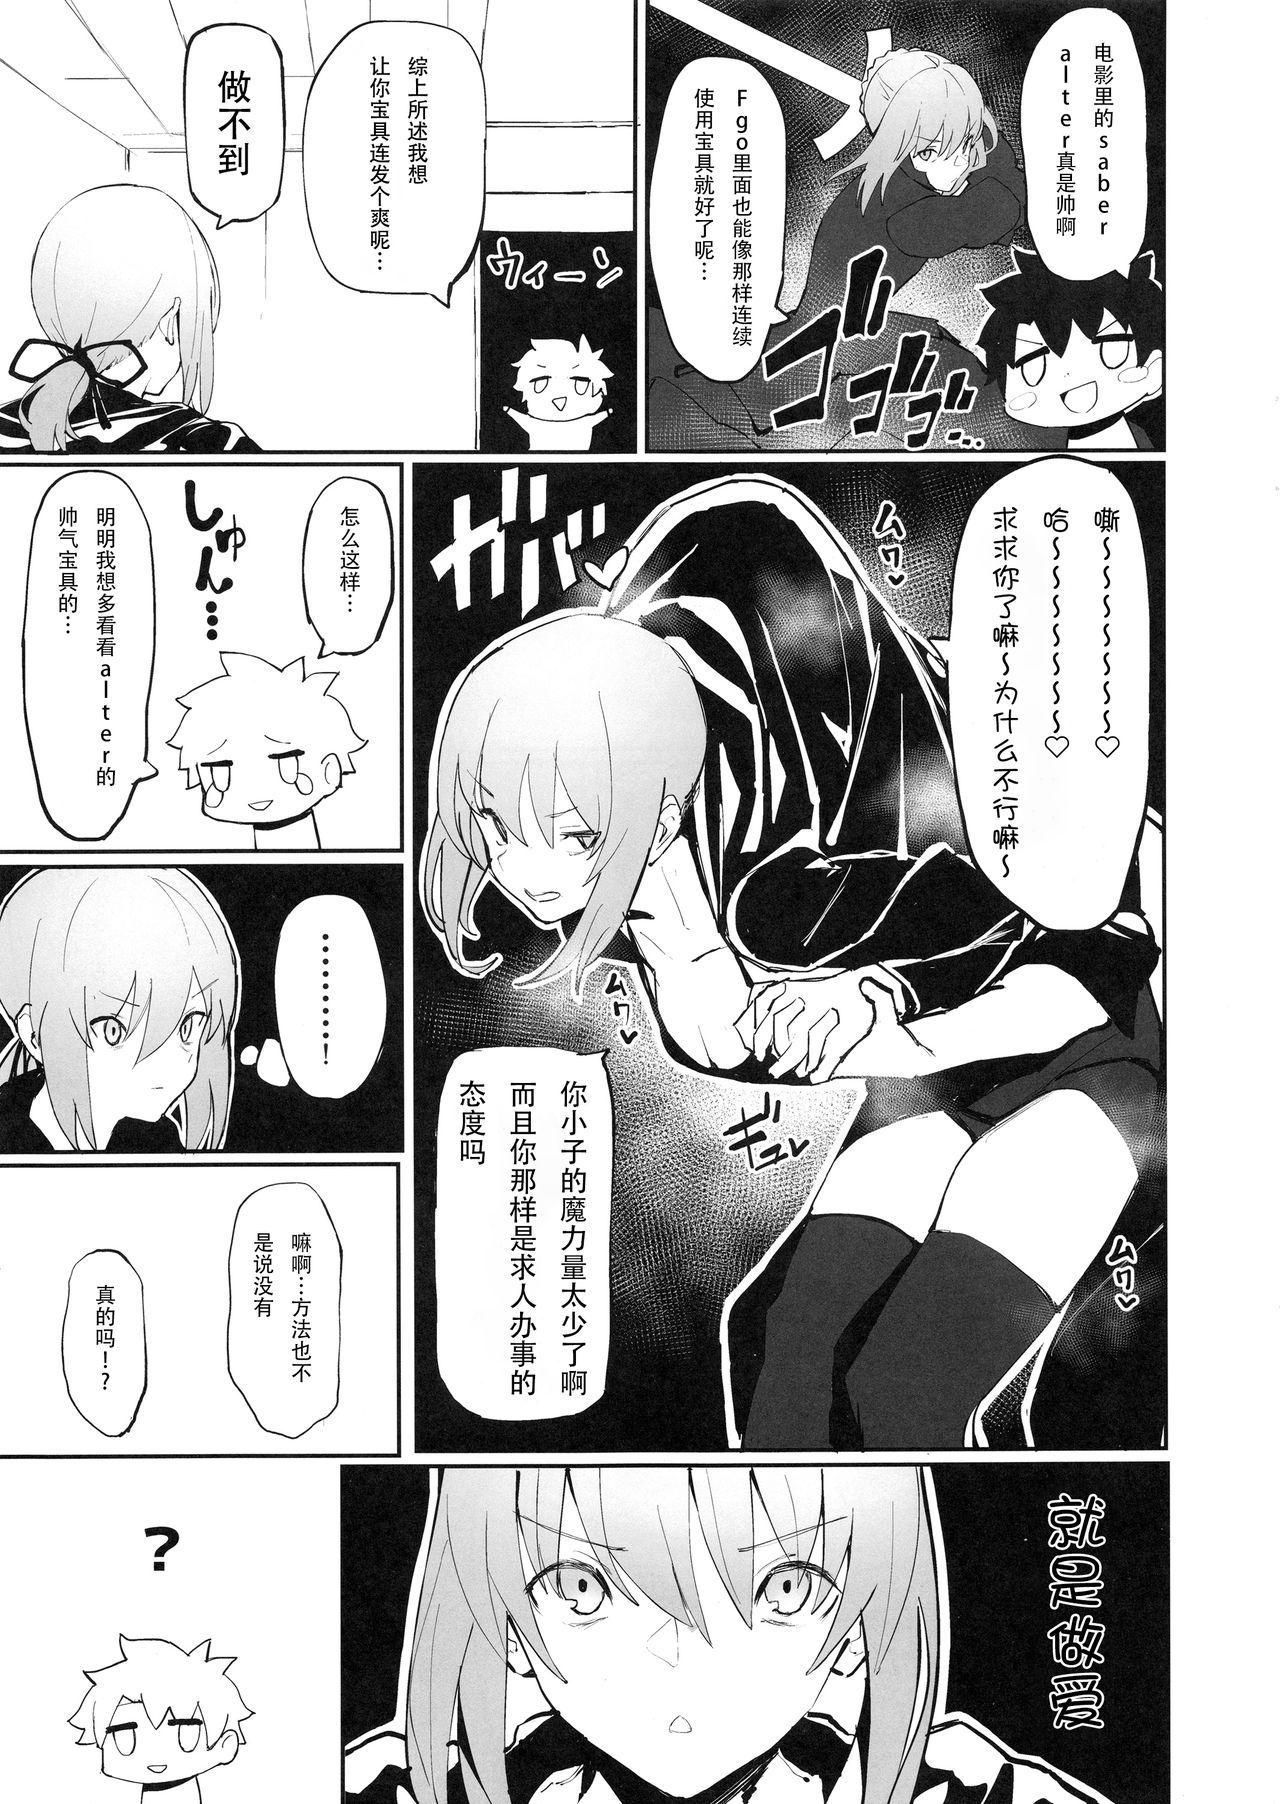 Jerk Off Instruction Saber Alter to Maryoku Kyoukyuu | 和saber alter的魔力供给♡ - Fate grand order Puba - Page 2